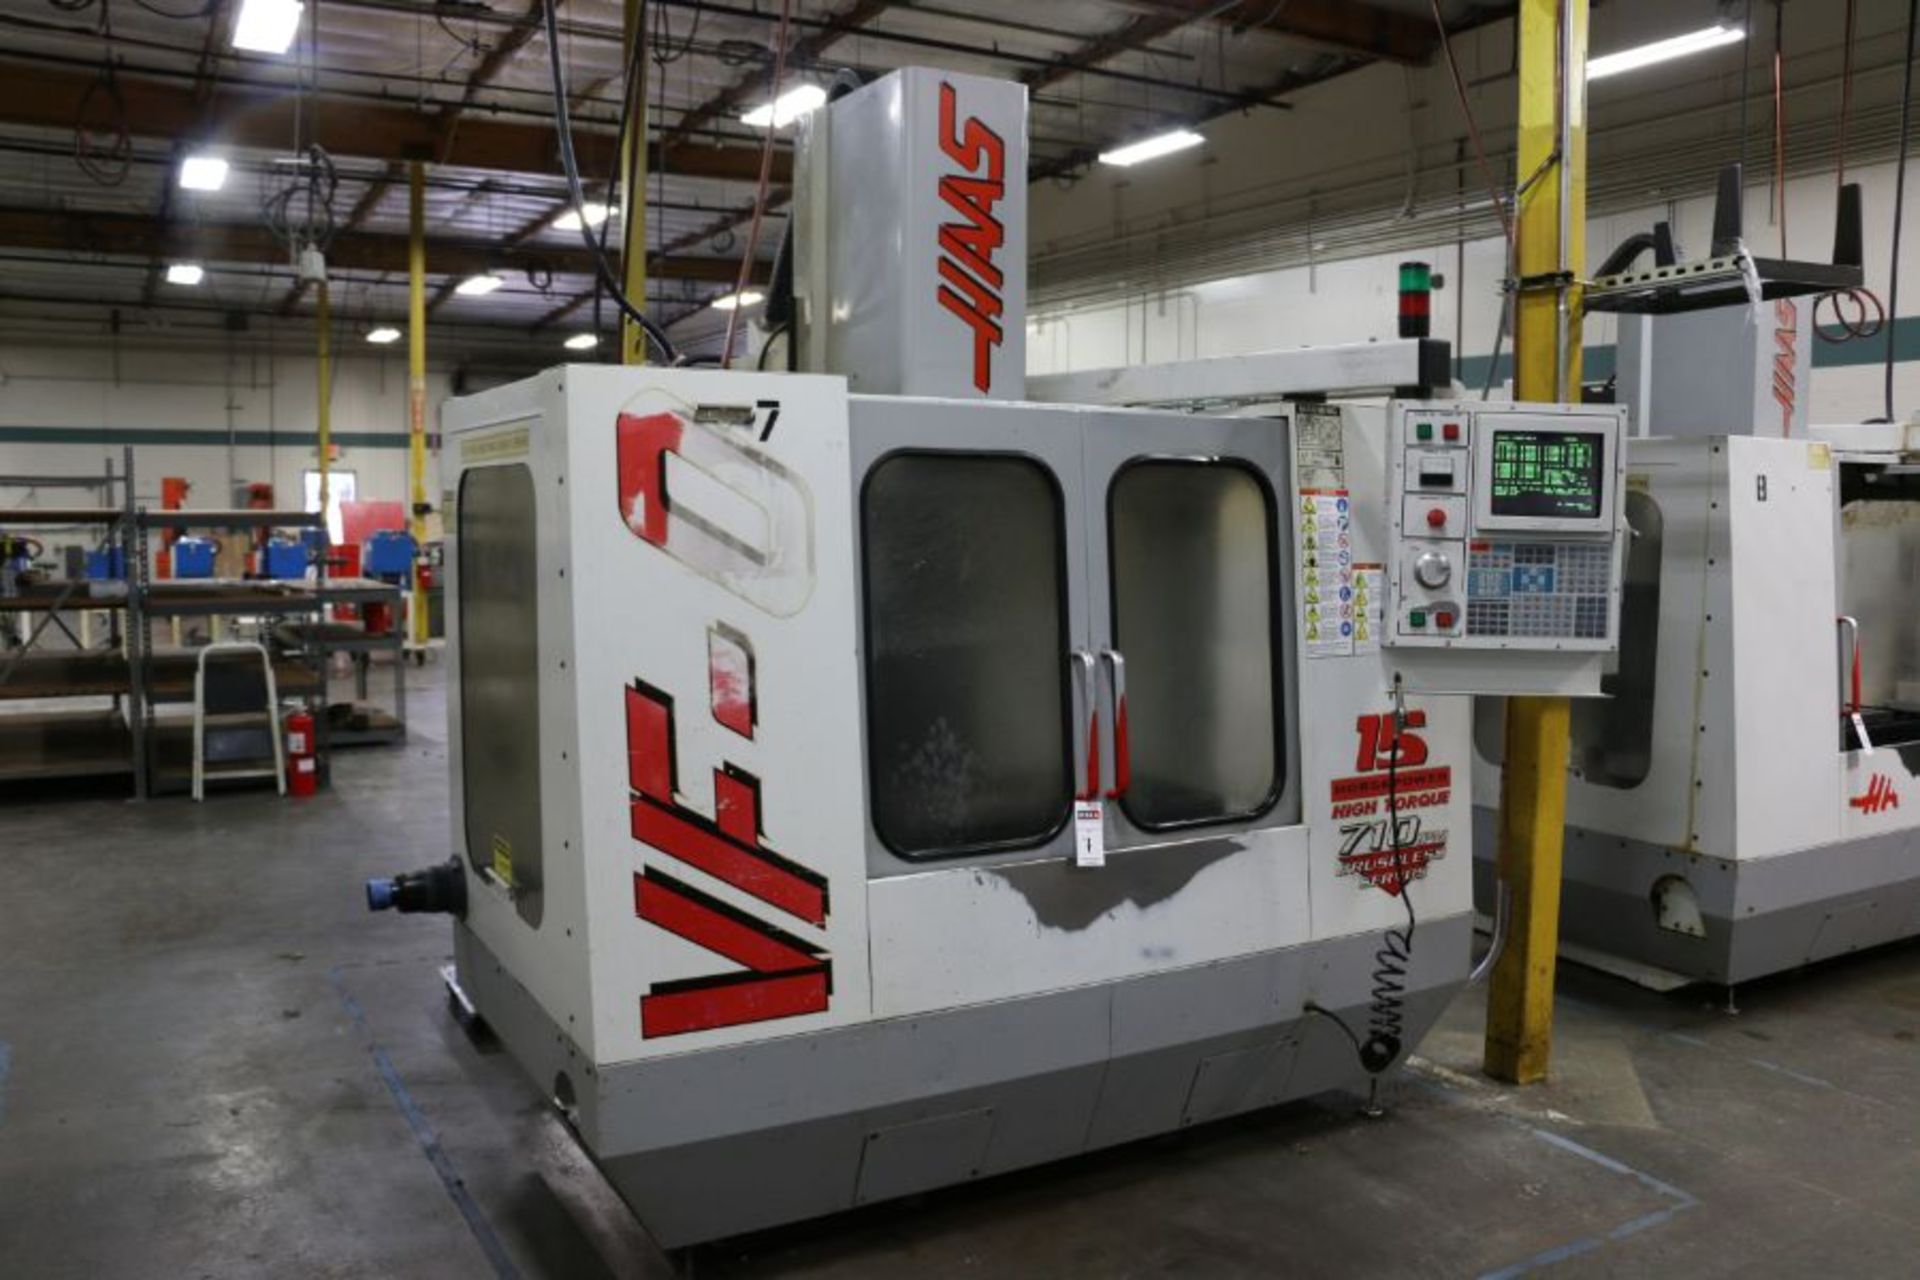 Haas VF-0, 20” x 16” x 20” Travels, 20 Position Tool Carousel, CT-40 Taper, s/n 11736, New 1997 - Image 2 of 12